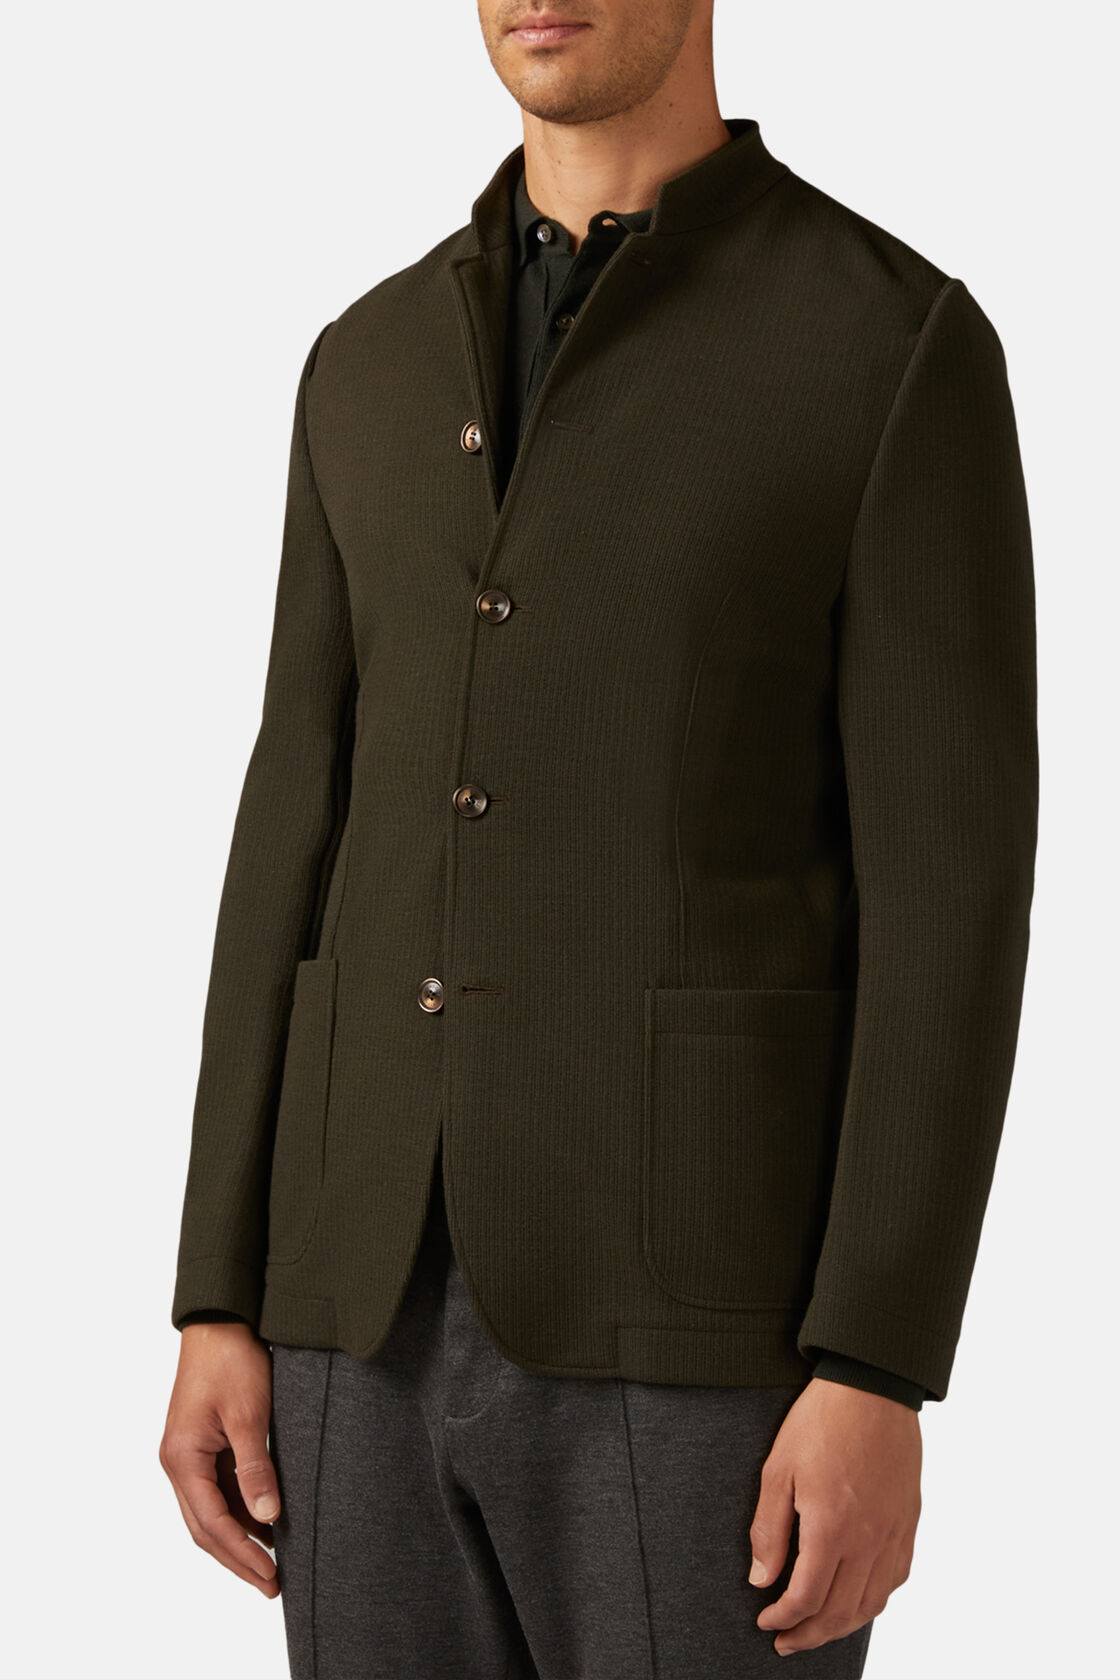 Green Bridge Jacket in B-Jersey Wool and Cotton, , hi-res